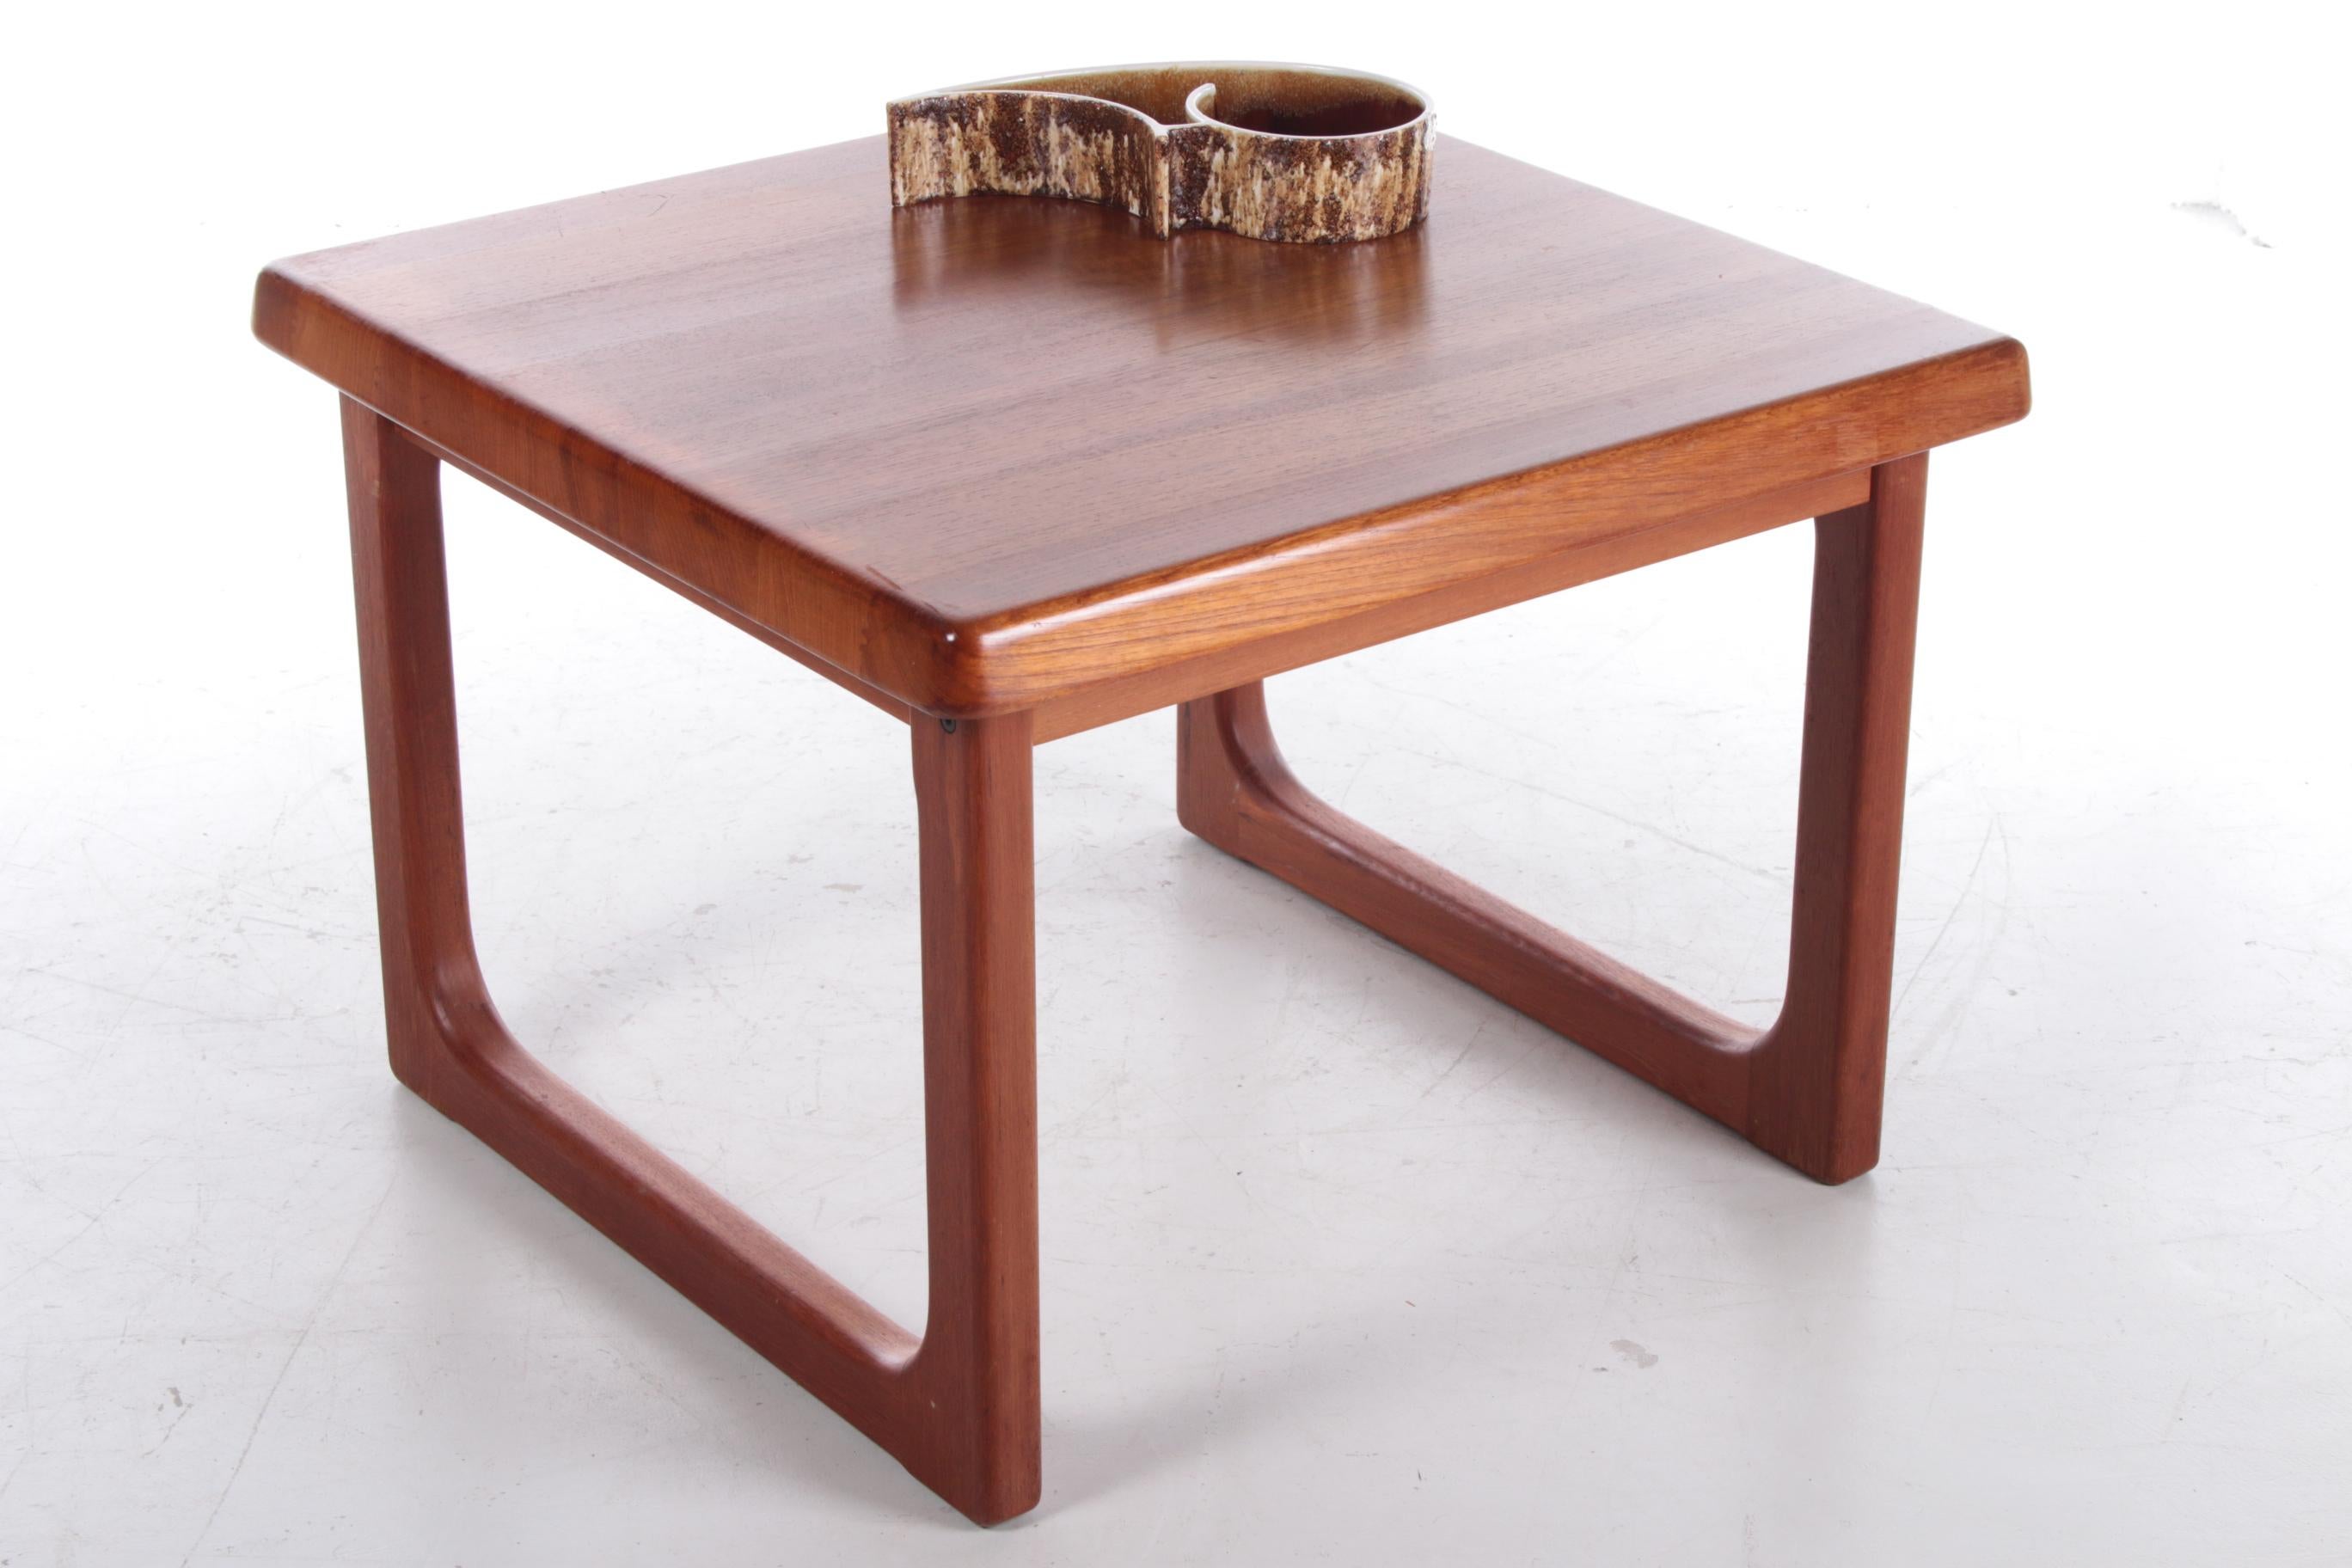 Vintage coffee table Niels Bach for Randers Denmark, 1970s


This table is a design by Niels Bach, born in Denmark.

It was made by Randers in the 1970s. There is a stamp on the bottom that was then applied by hand.

It has a nice look and a